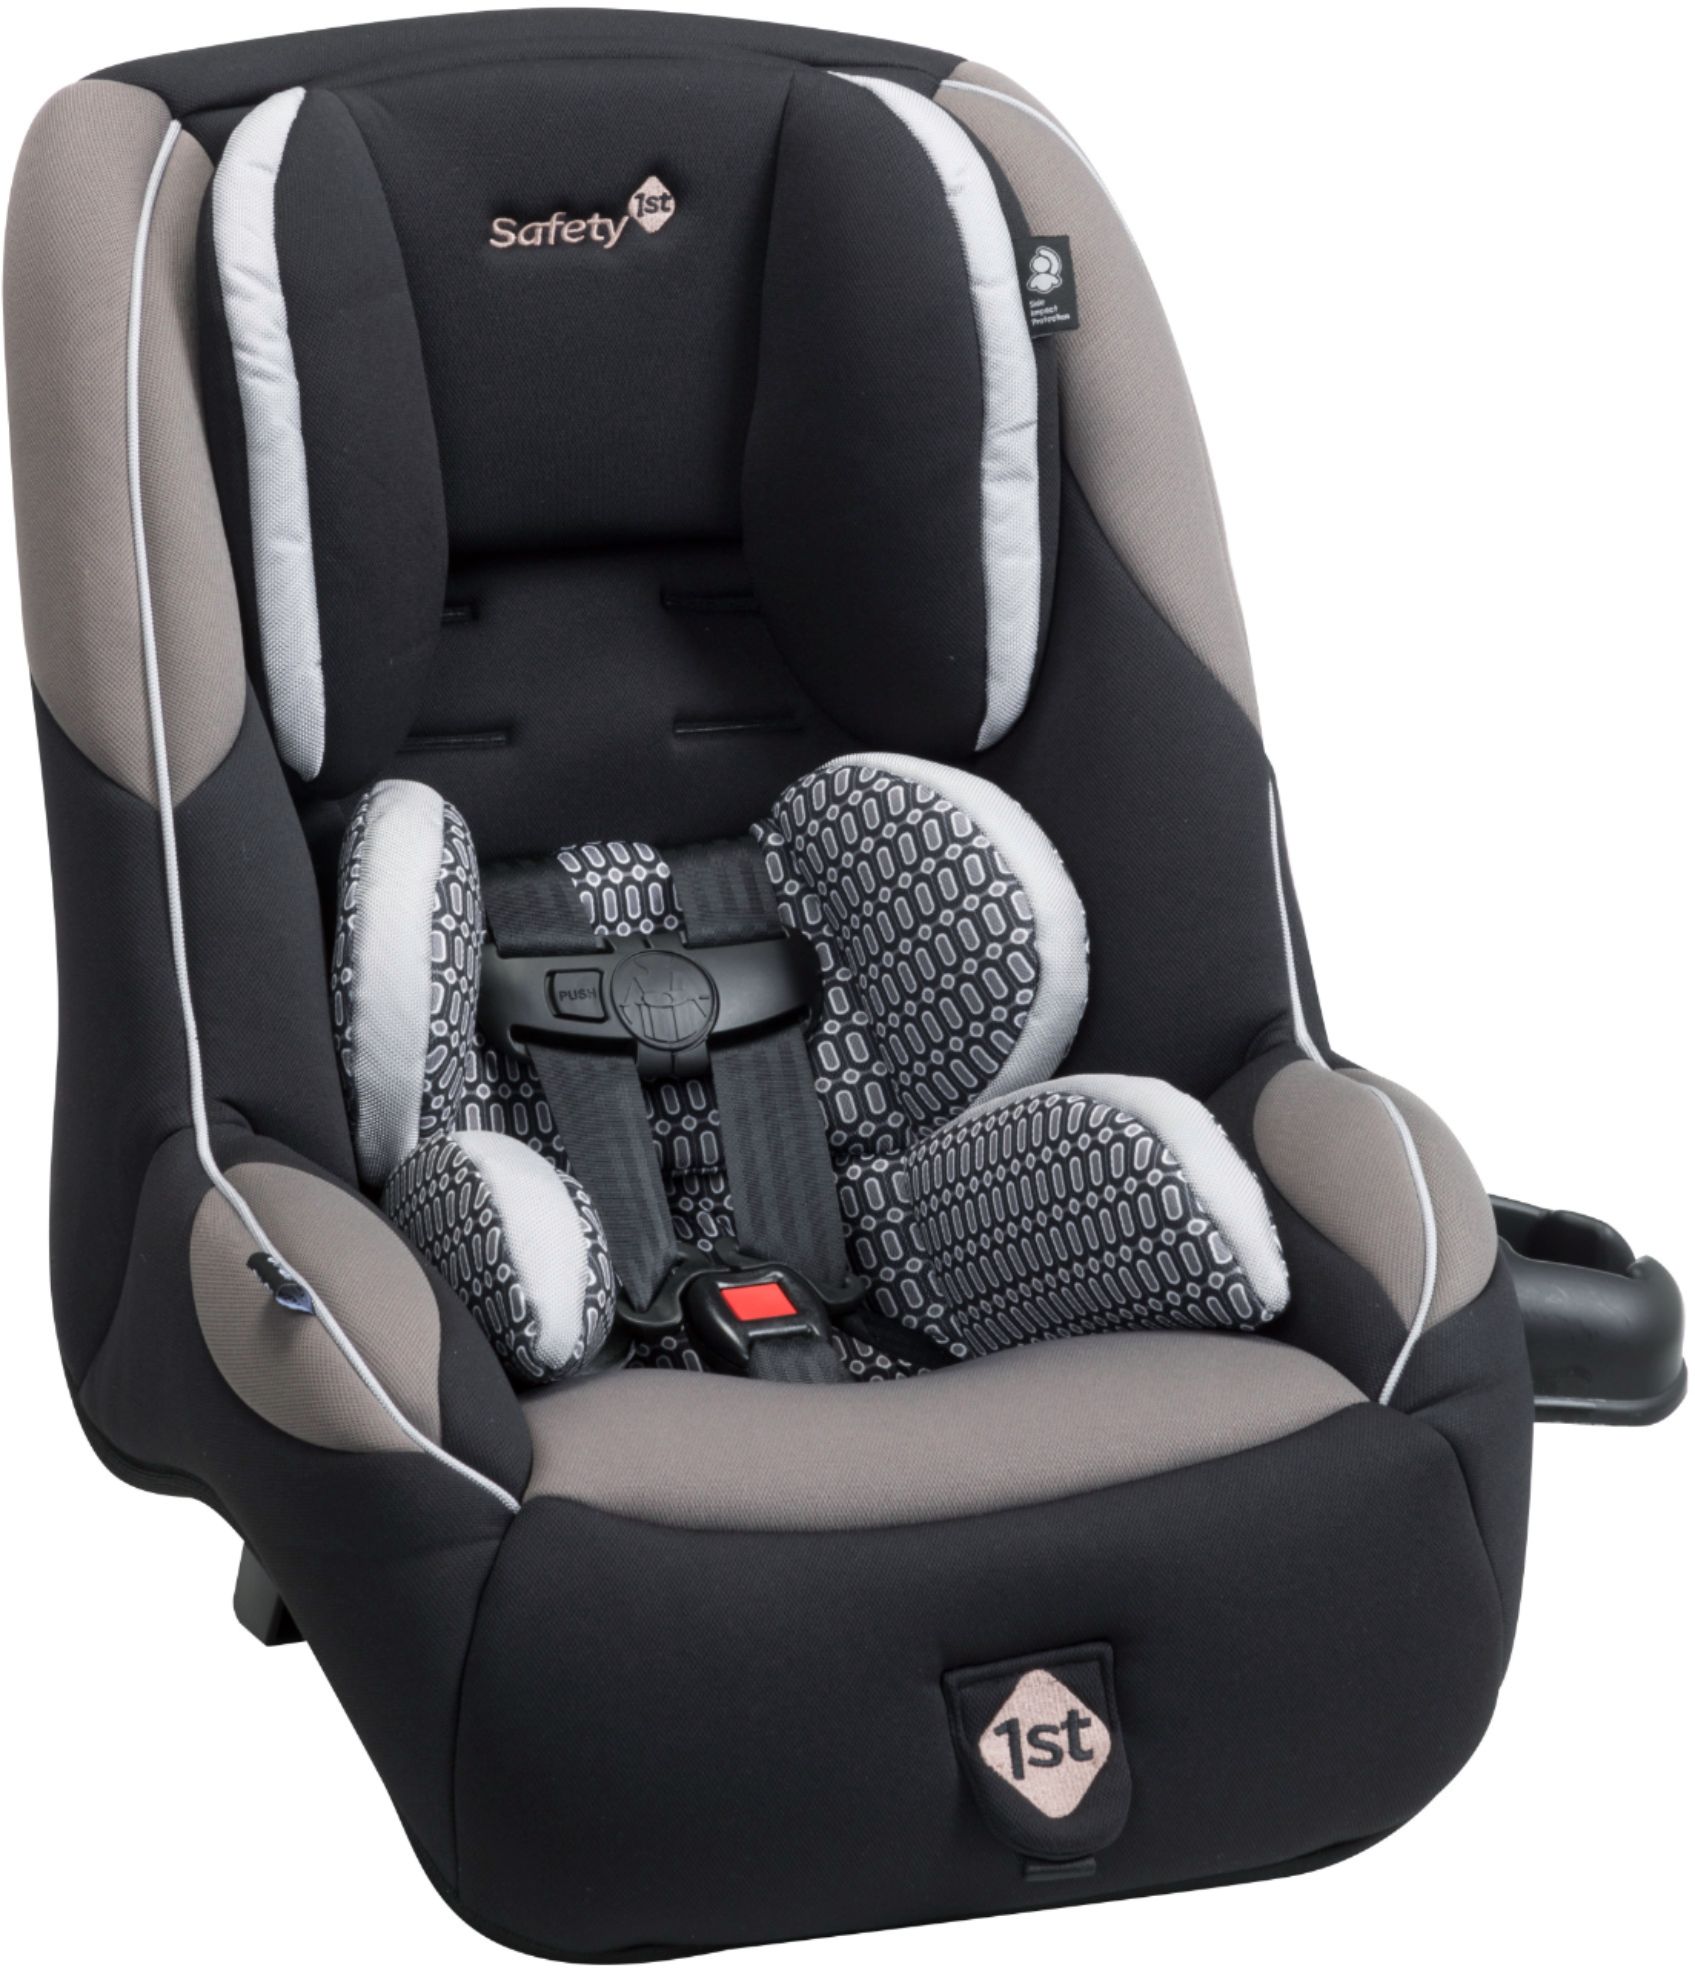 Angle View: Safety 1st - Continuum 3-in-1 Car Seat - Black